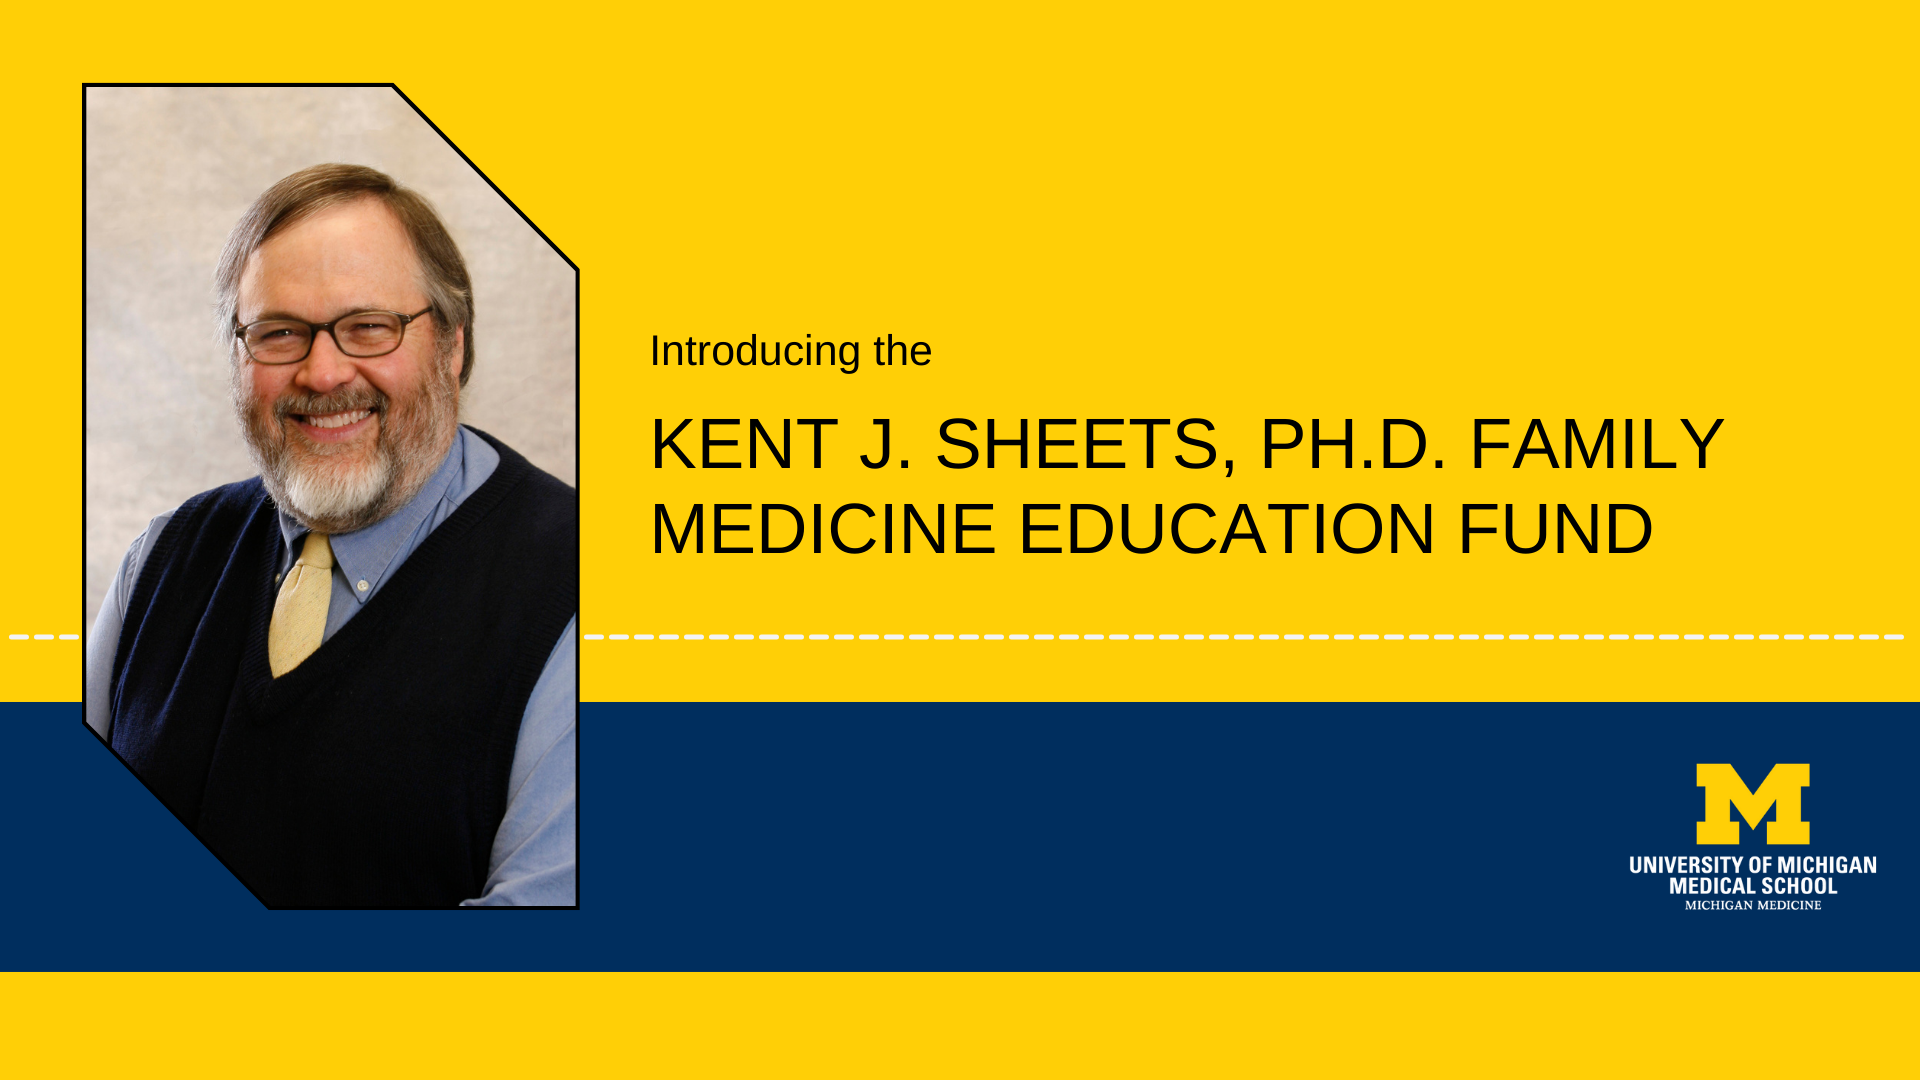 Reads: Introducing the Kent J. Sheets, Ph.D. Family Medicine education Fund. Includes a headshot of Dr. Sheets. 